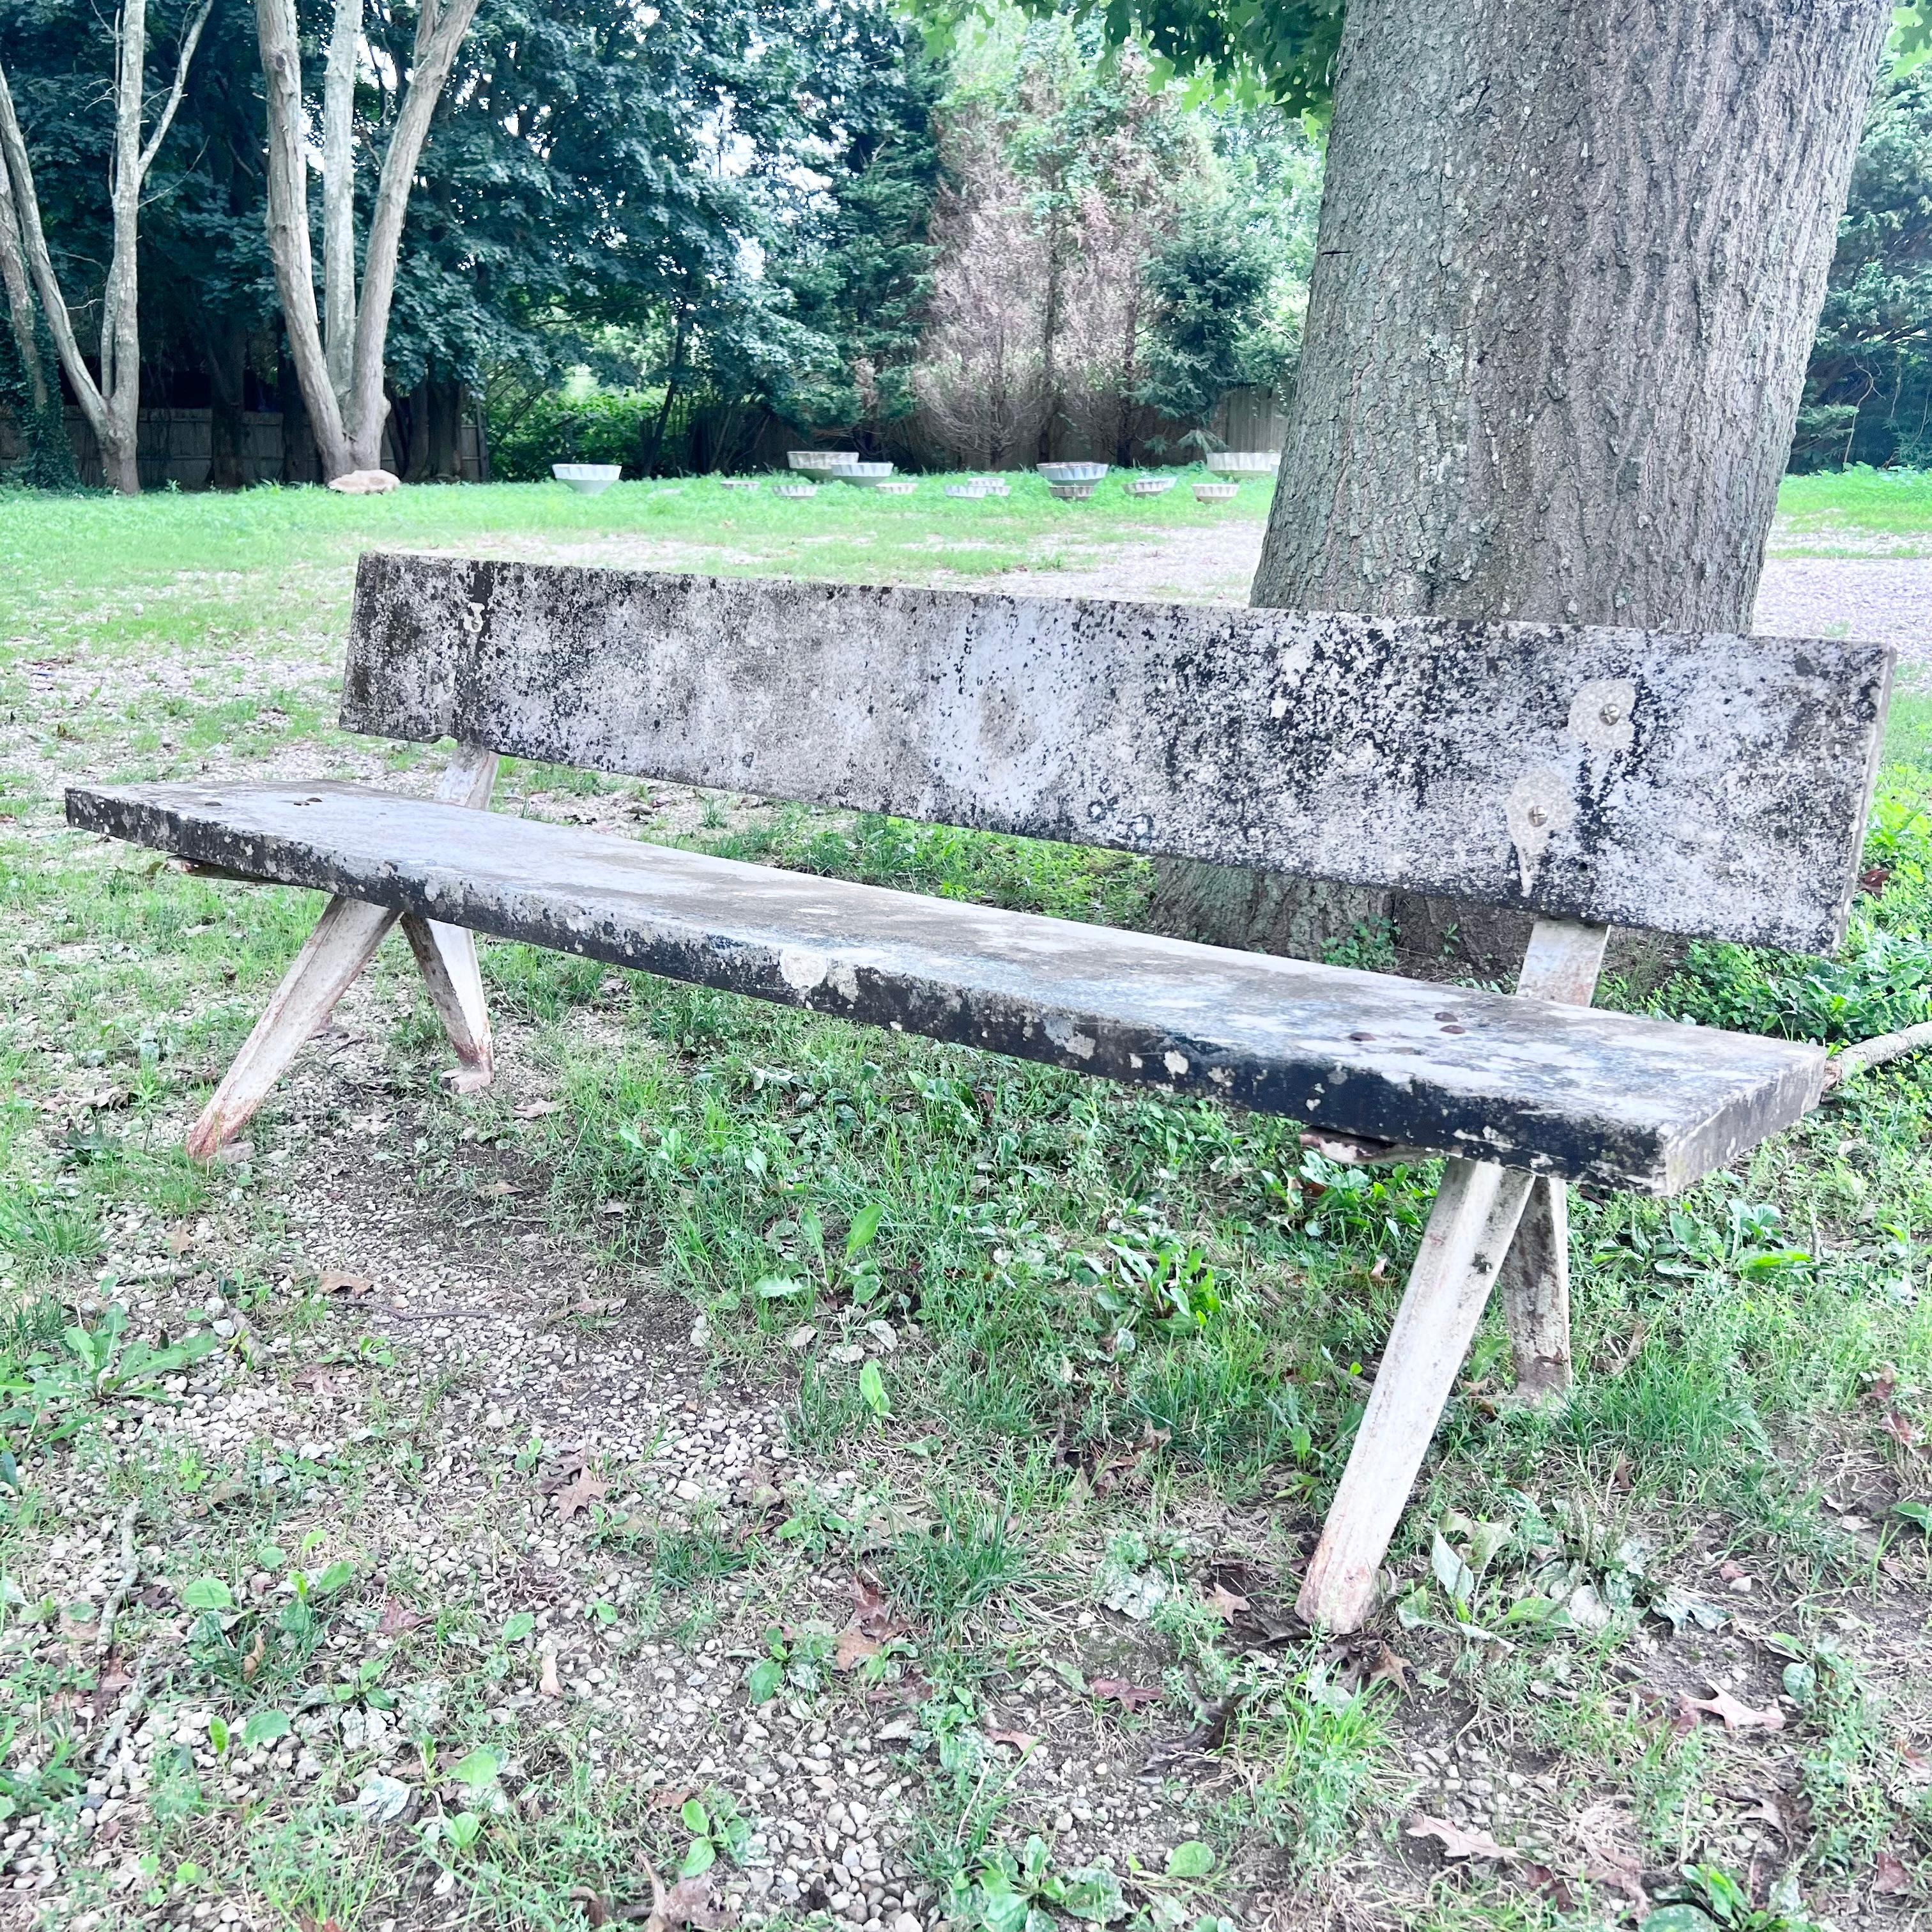 Stunning pair of Jean Prouvé style concrete benches from France, circa 1960. Very similar to Prouvé’s iconic ‘Marcoule’ bench from 1953, these benches were clearly designed and fabricated as a wonderful homage to the master architect/designer. Years